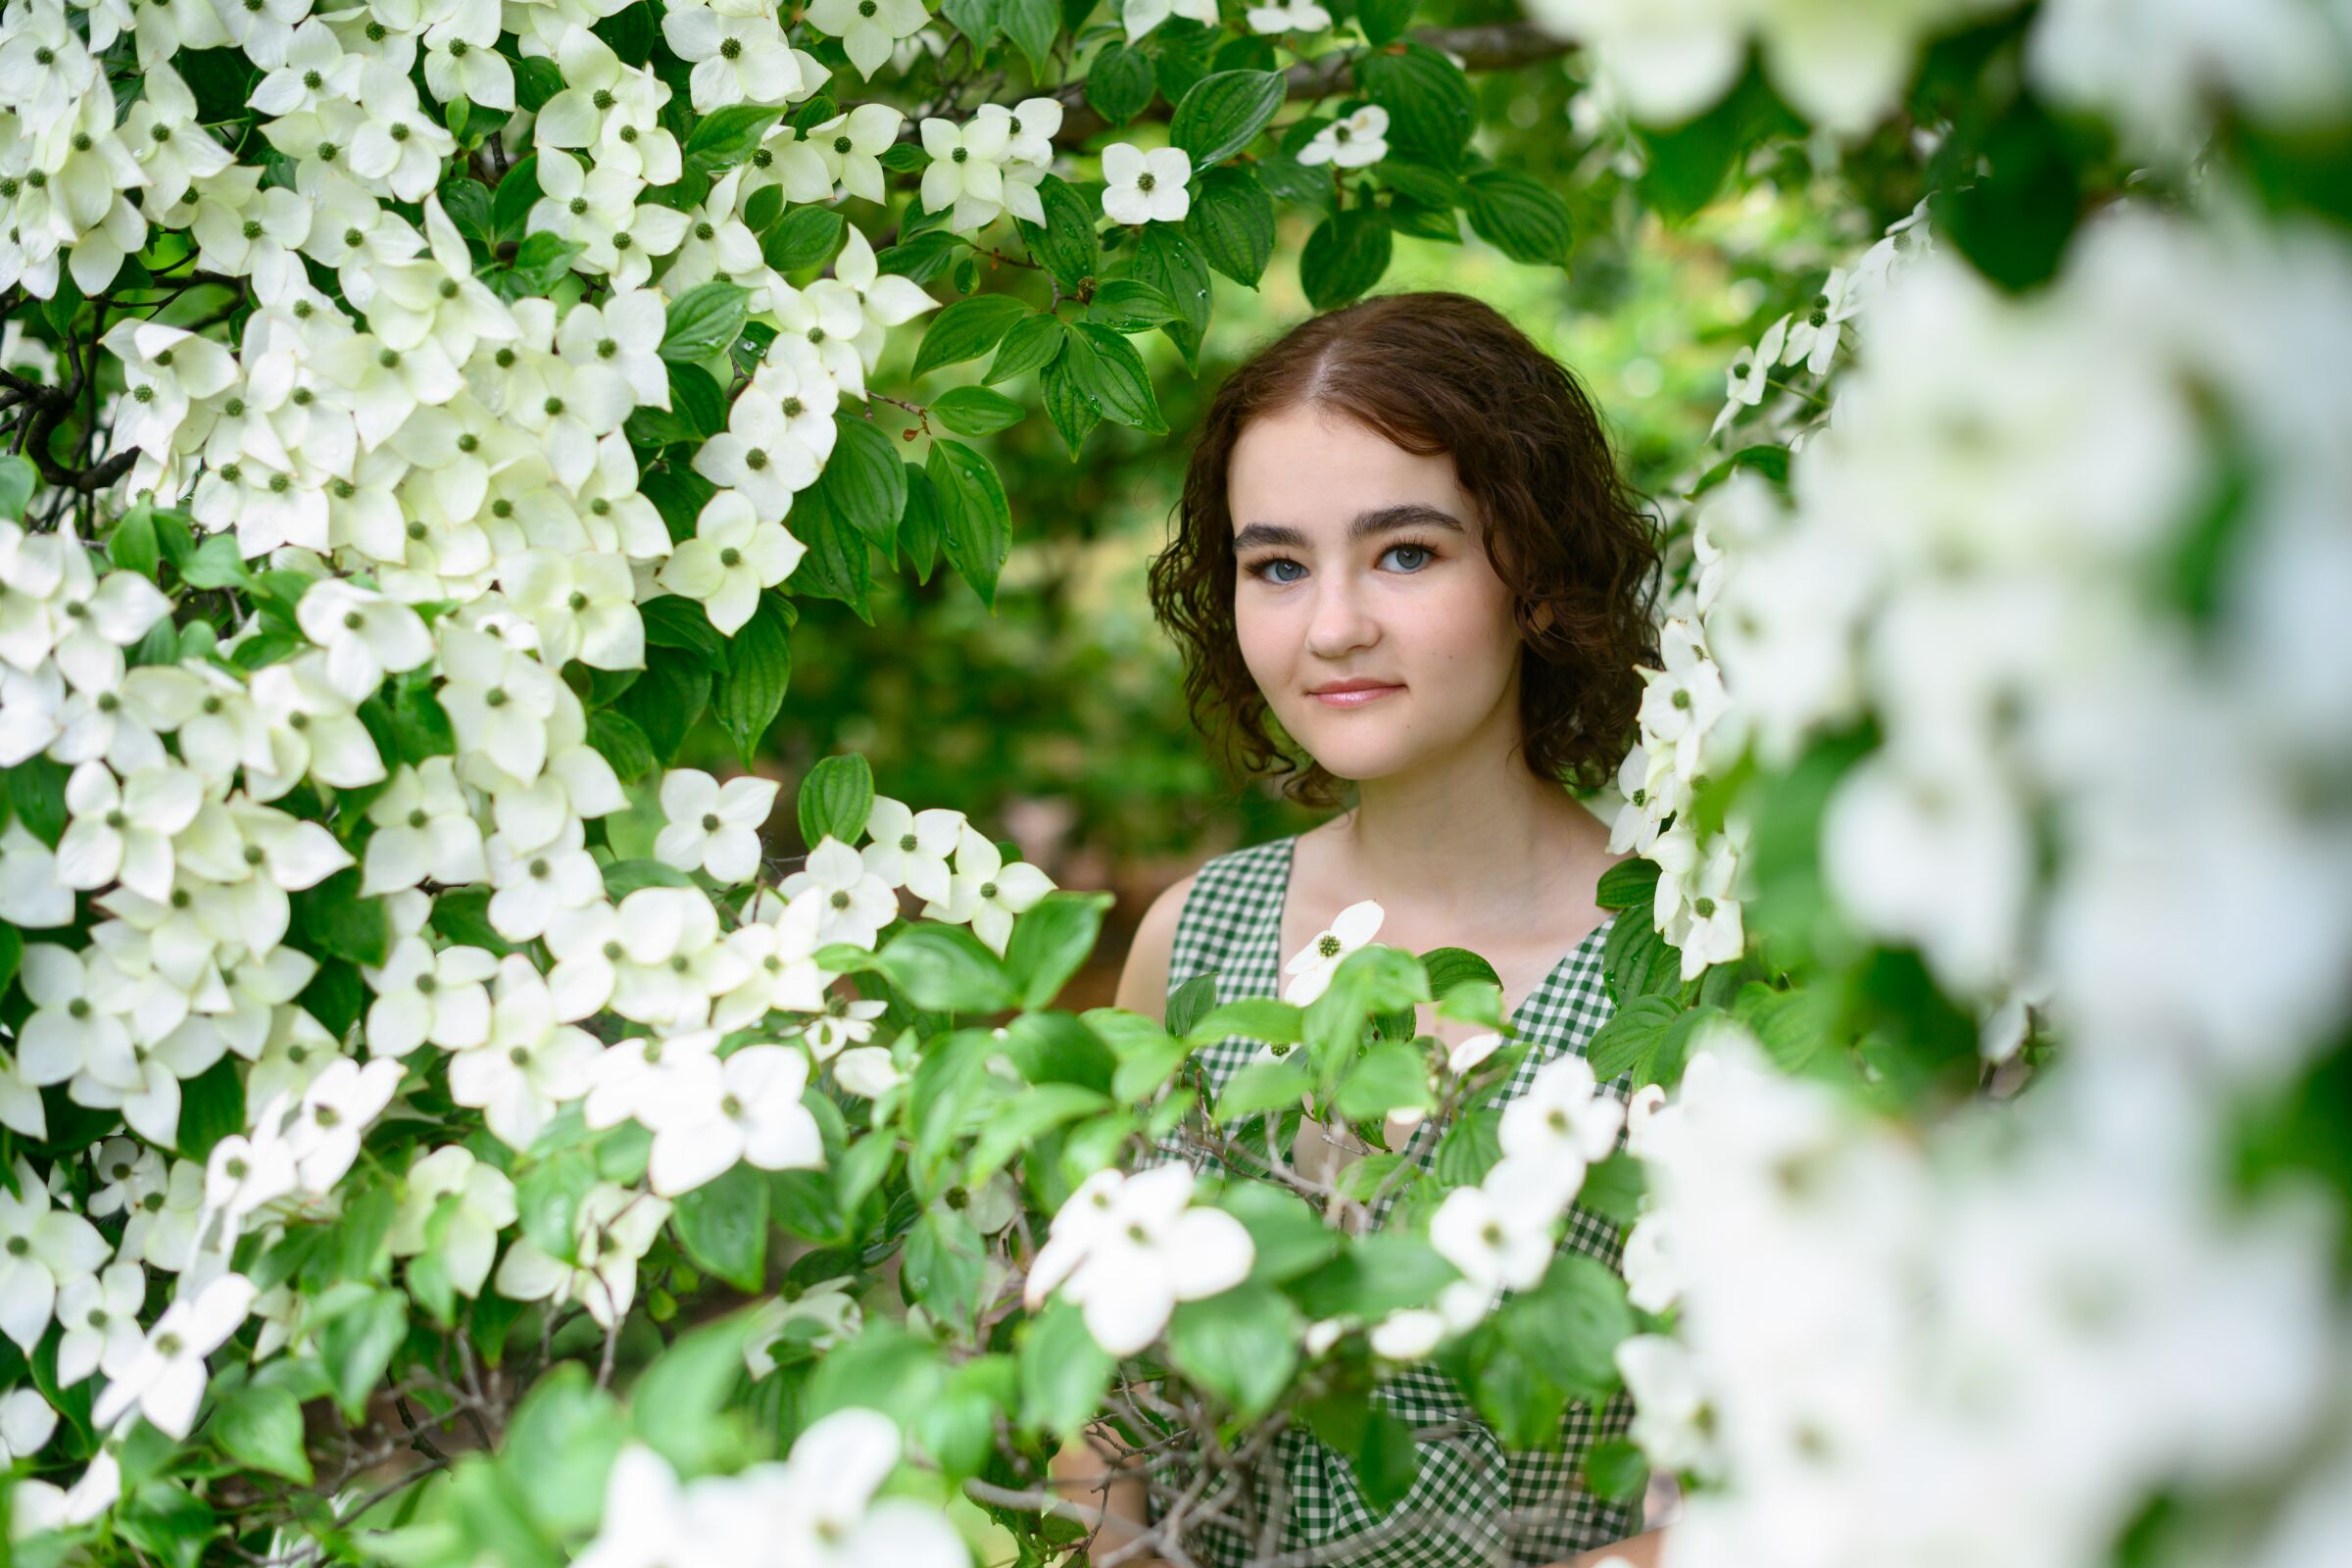 Young actress Millicent Simmonds peers through an opening in a flowering vine.